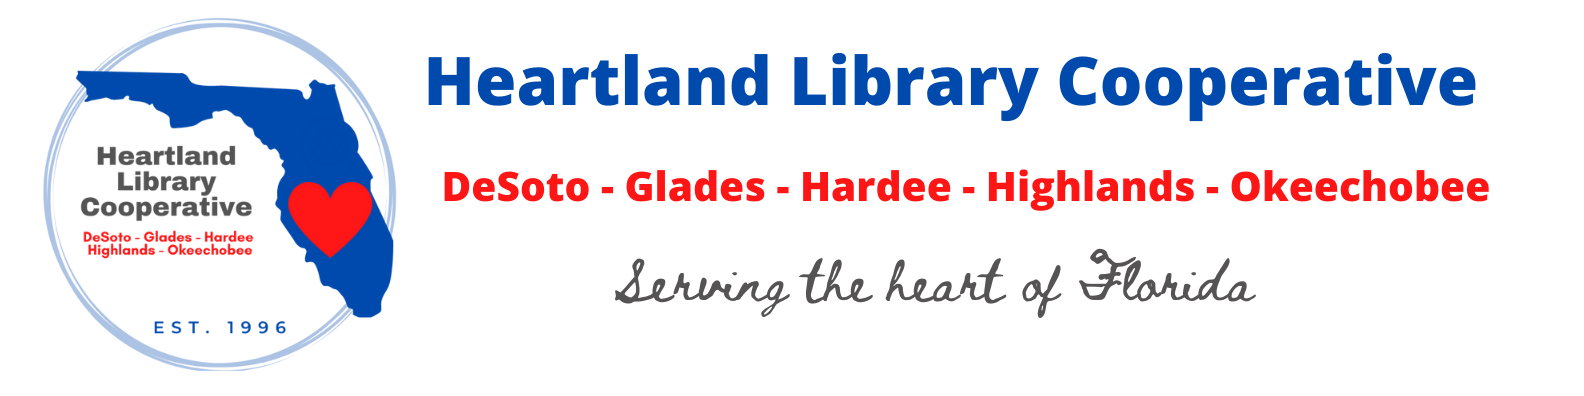 Image states: Heartland Library Cooperative, serving DeSoto, Glades, Hardee, Highlands, & Okeechobee Counties